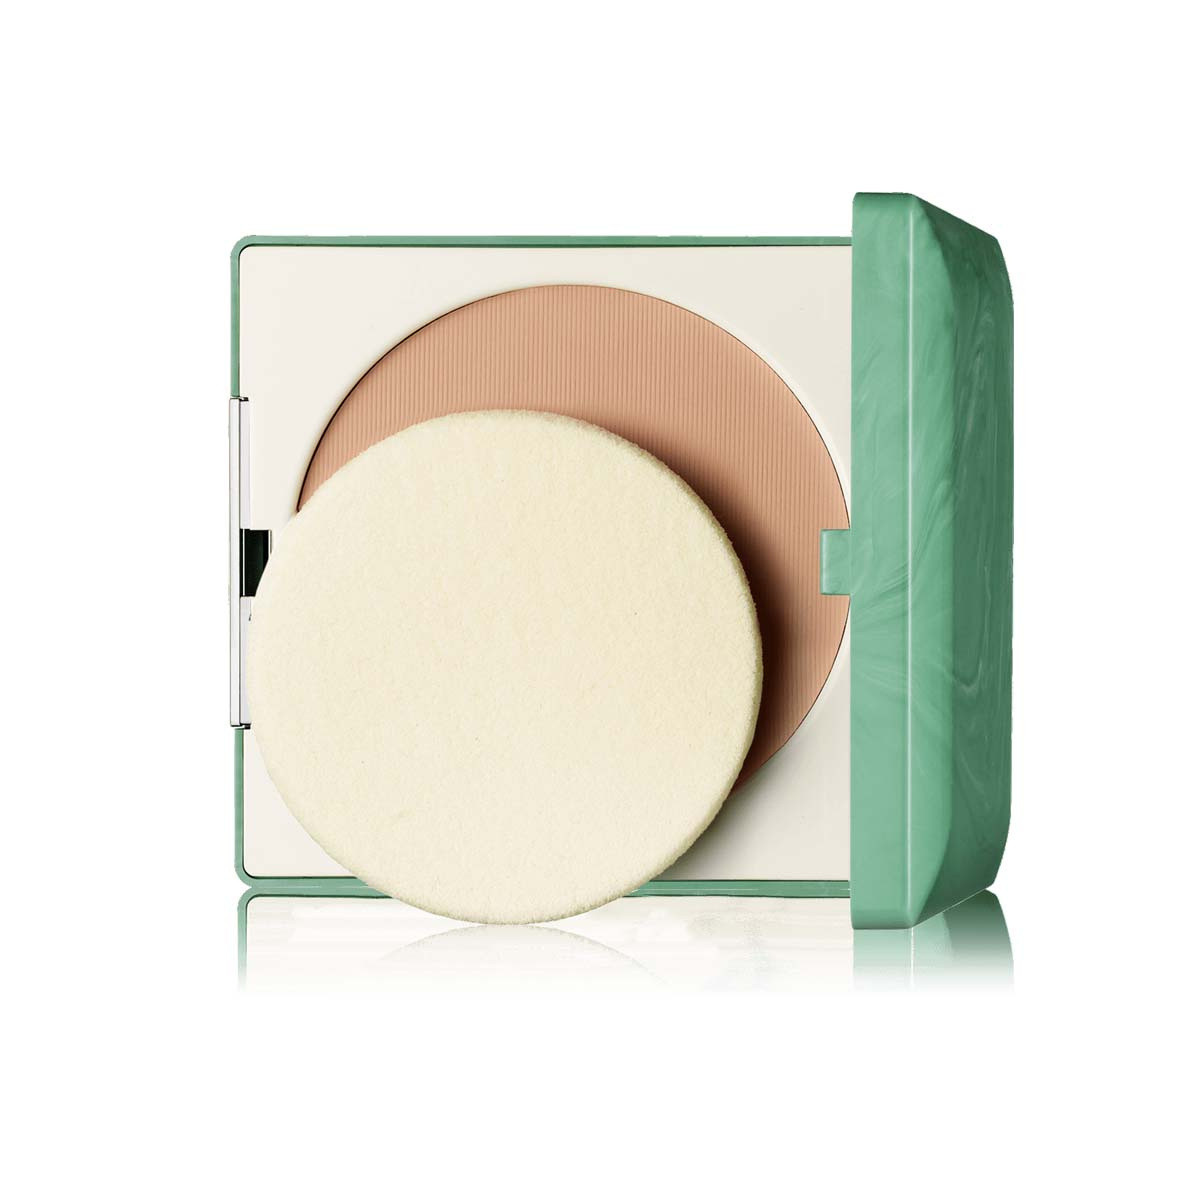 Clinique stay matte sheer pressed powder, , large